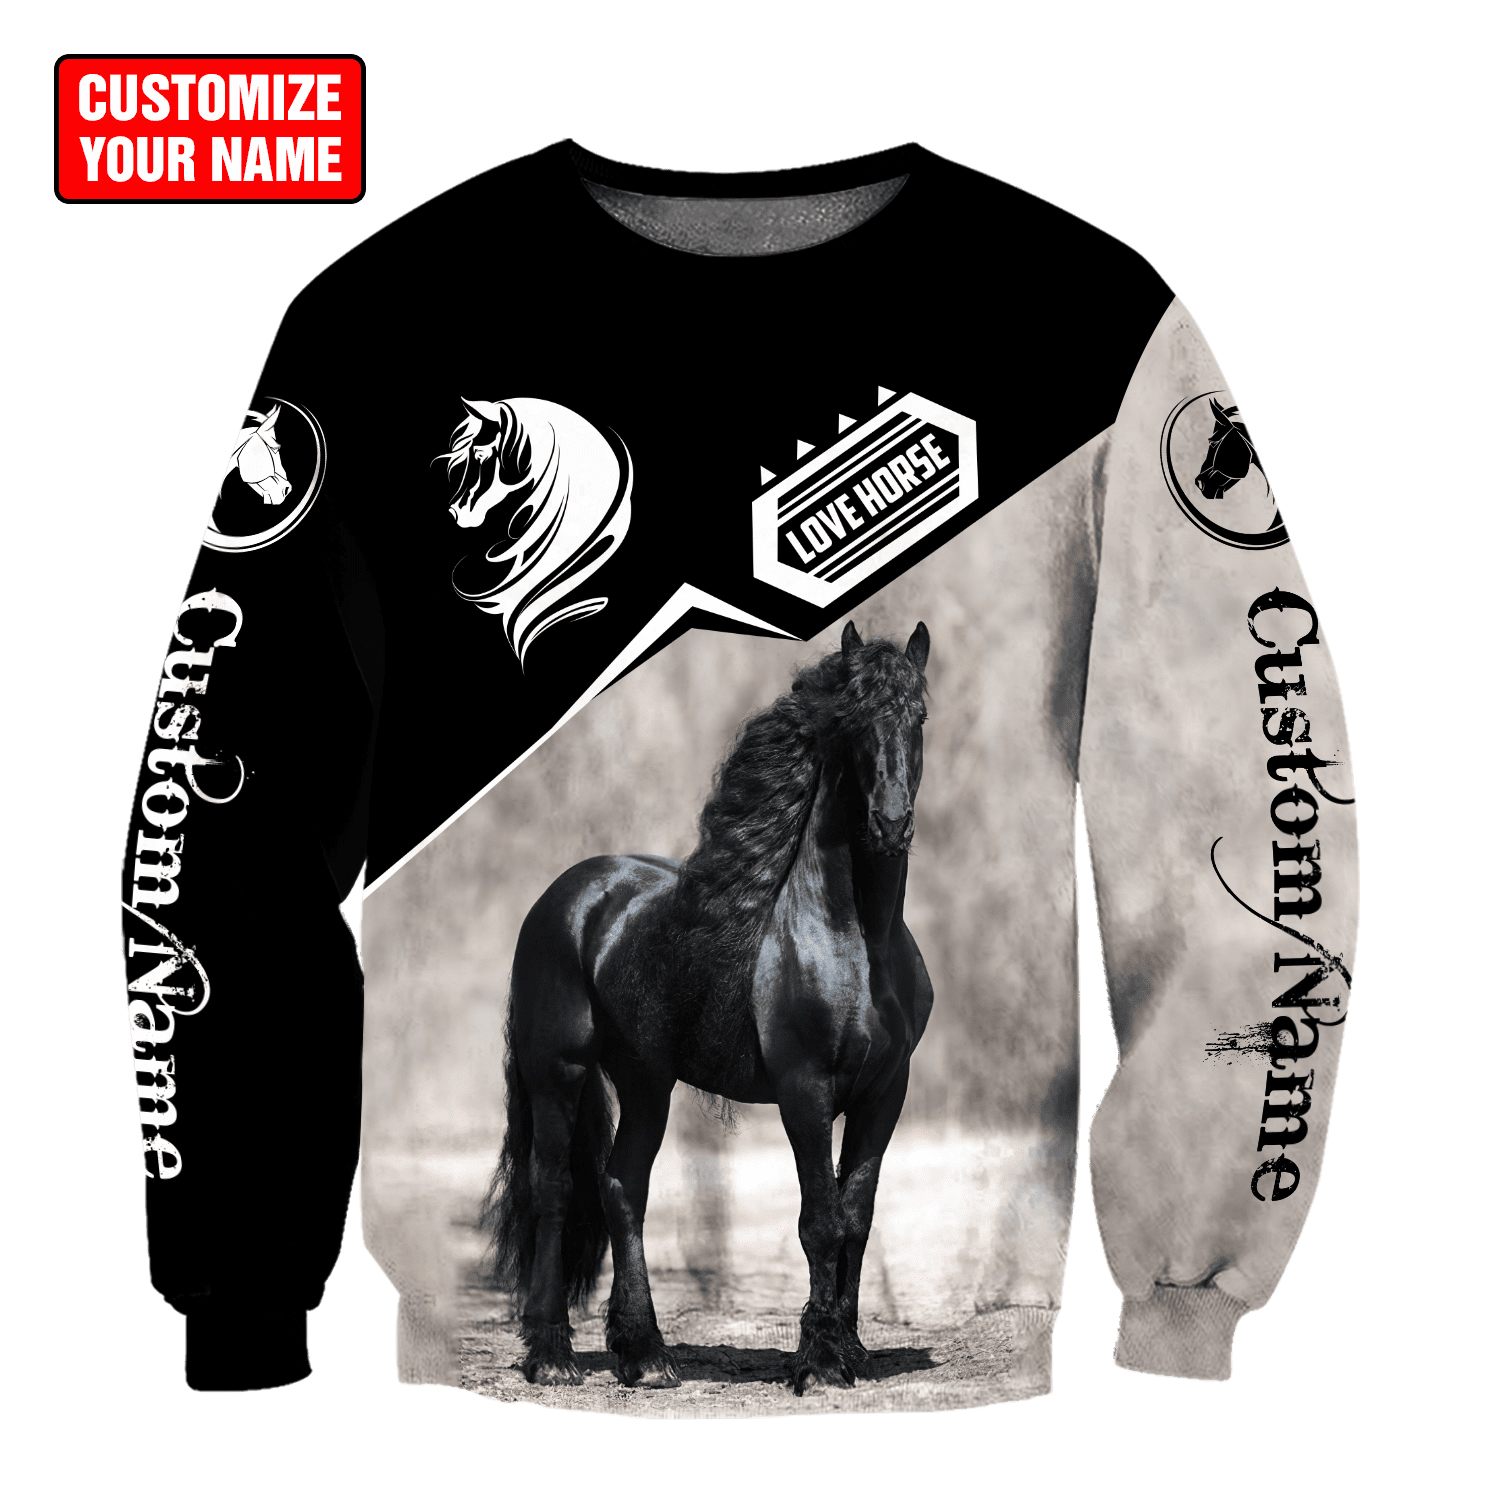 Personalized Name Friesian Horse 3D All Over Printed Unisex Shirt3